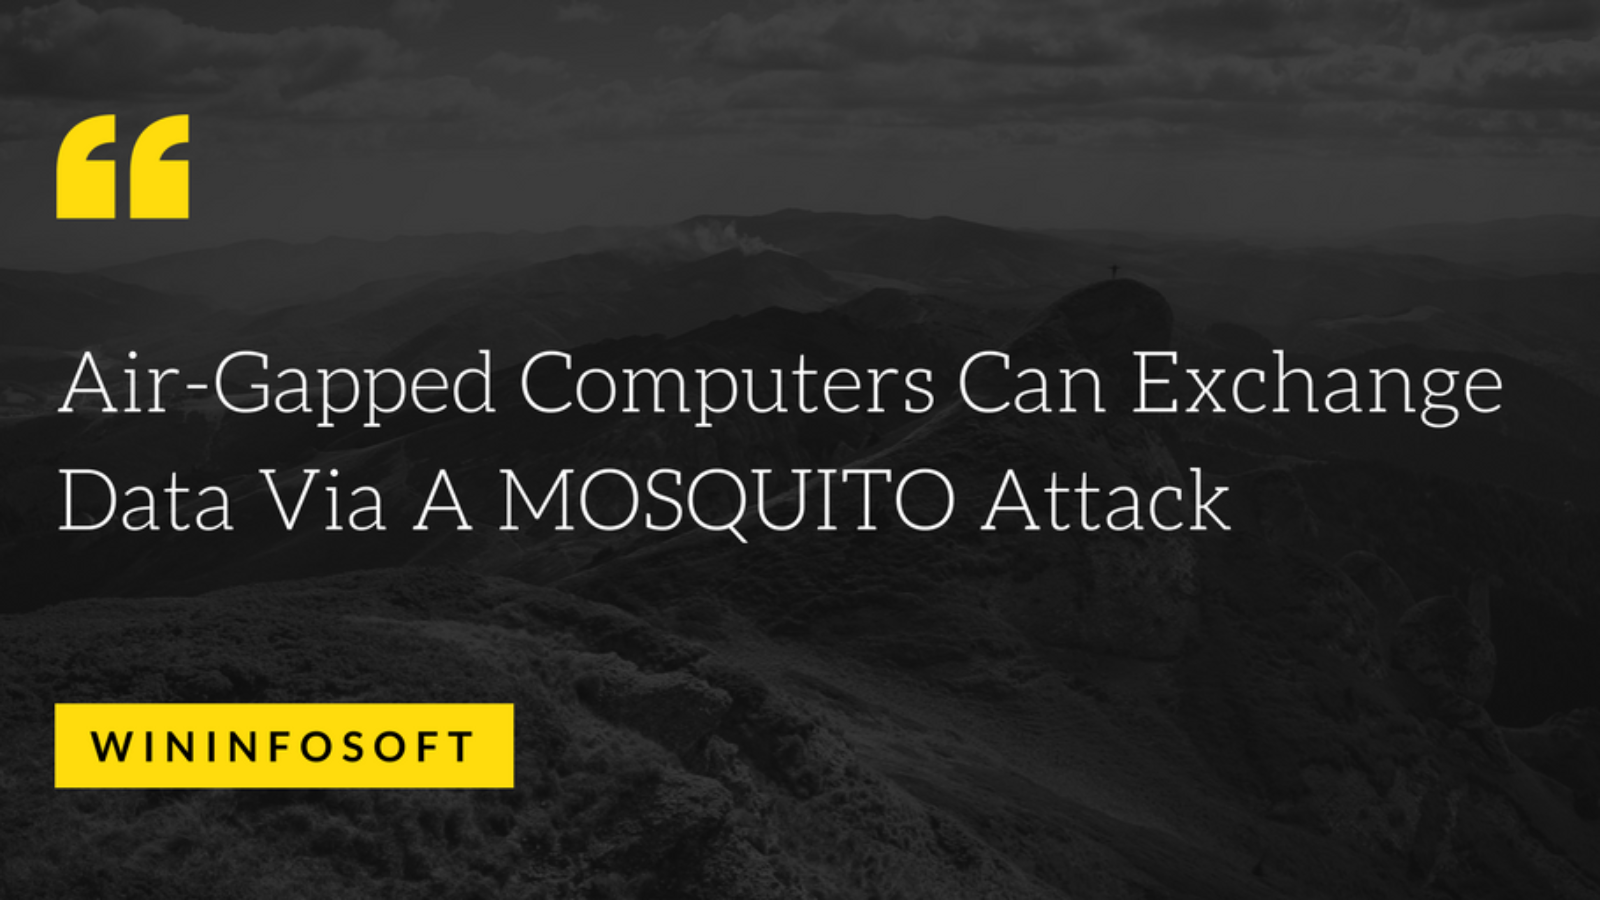 Air-Gapped Computers Can Exchange Data Via A MOSQUITO Attack